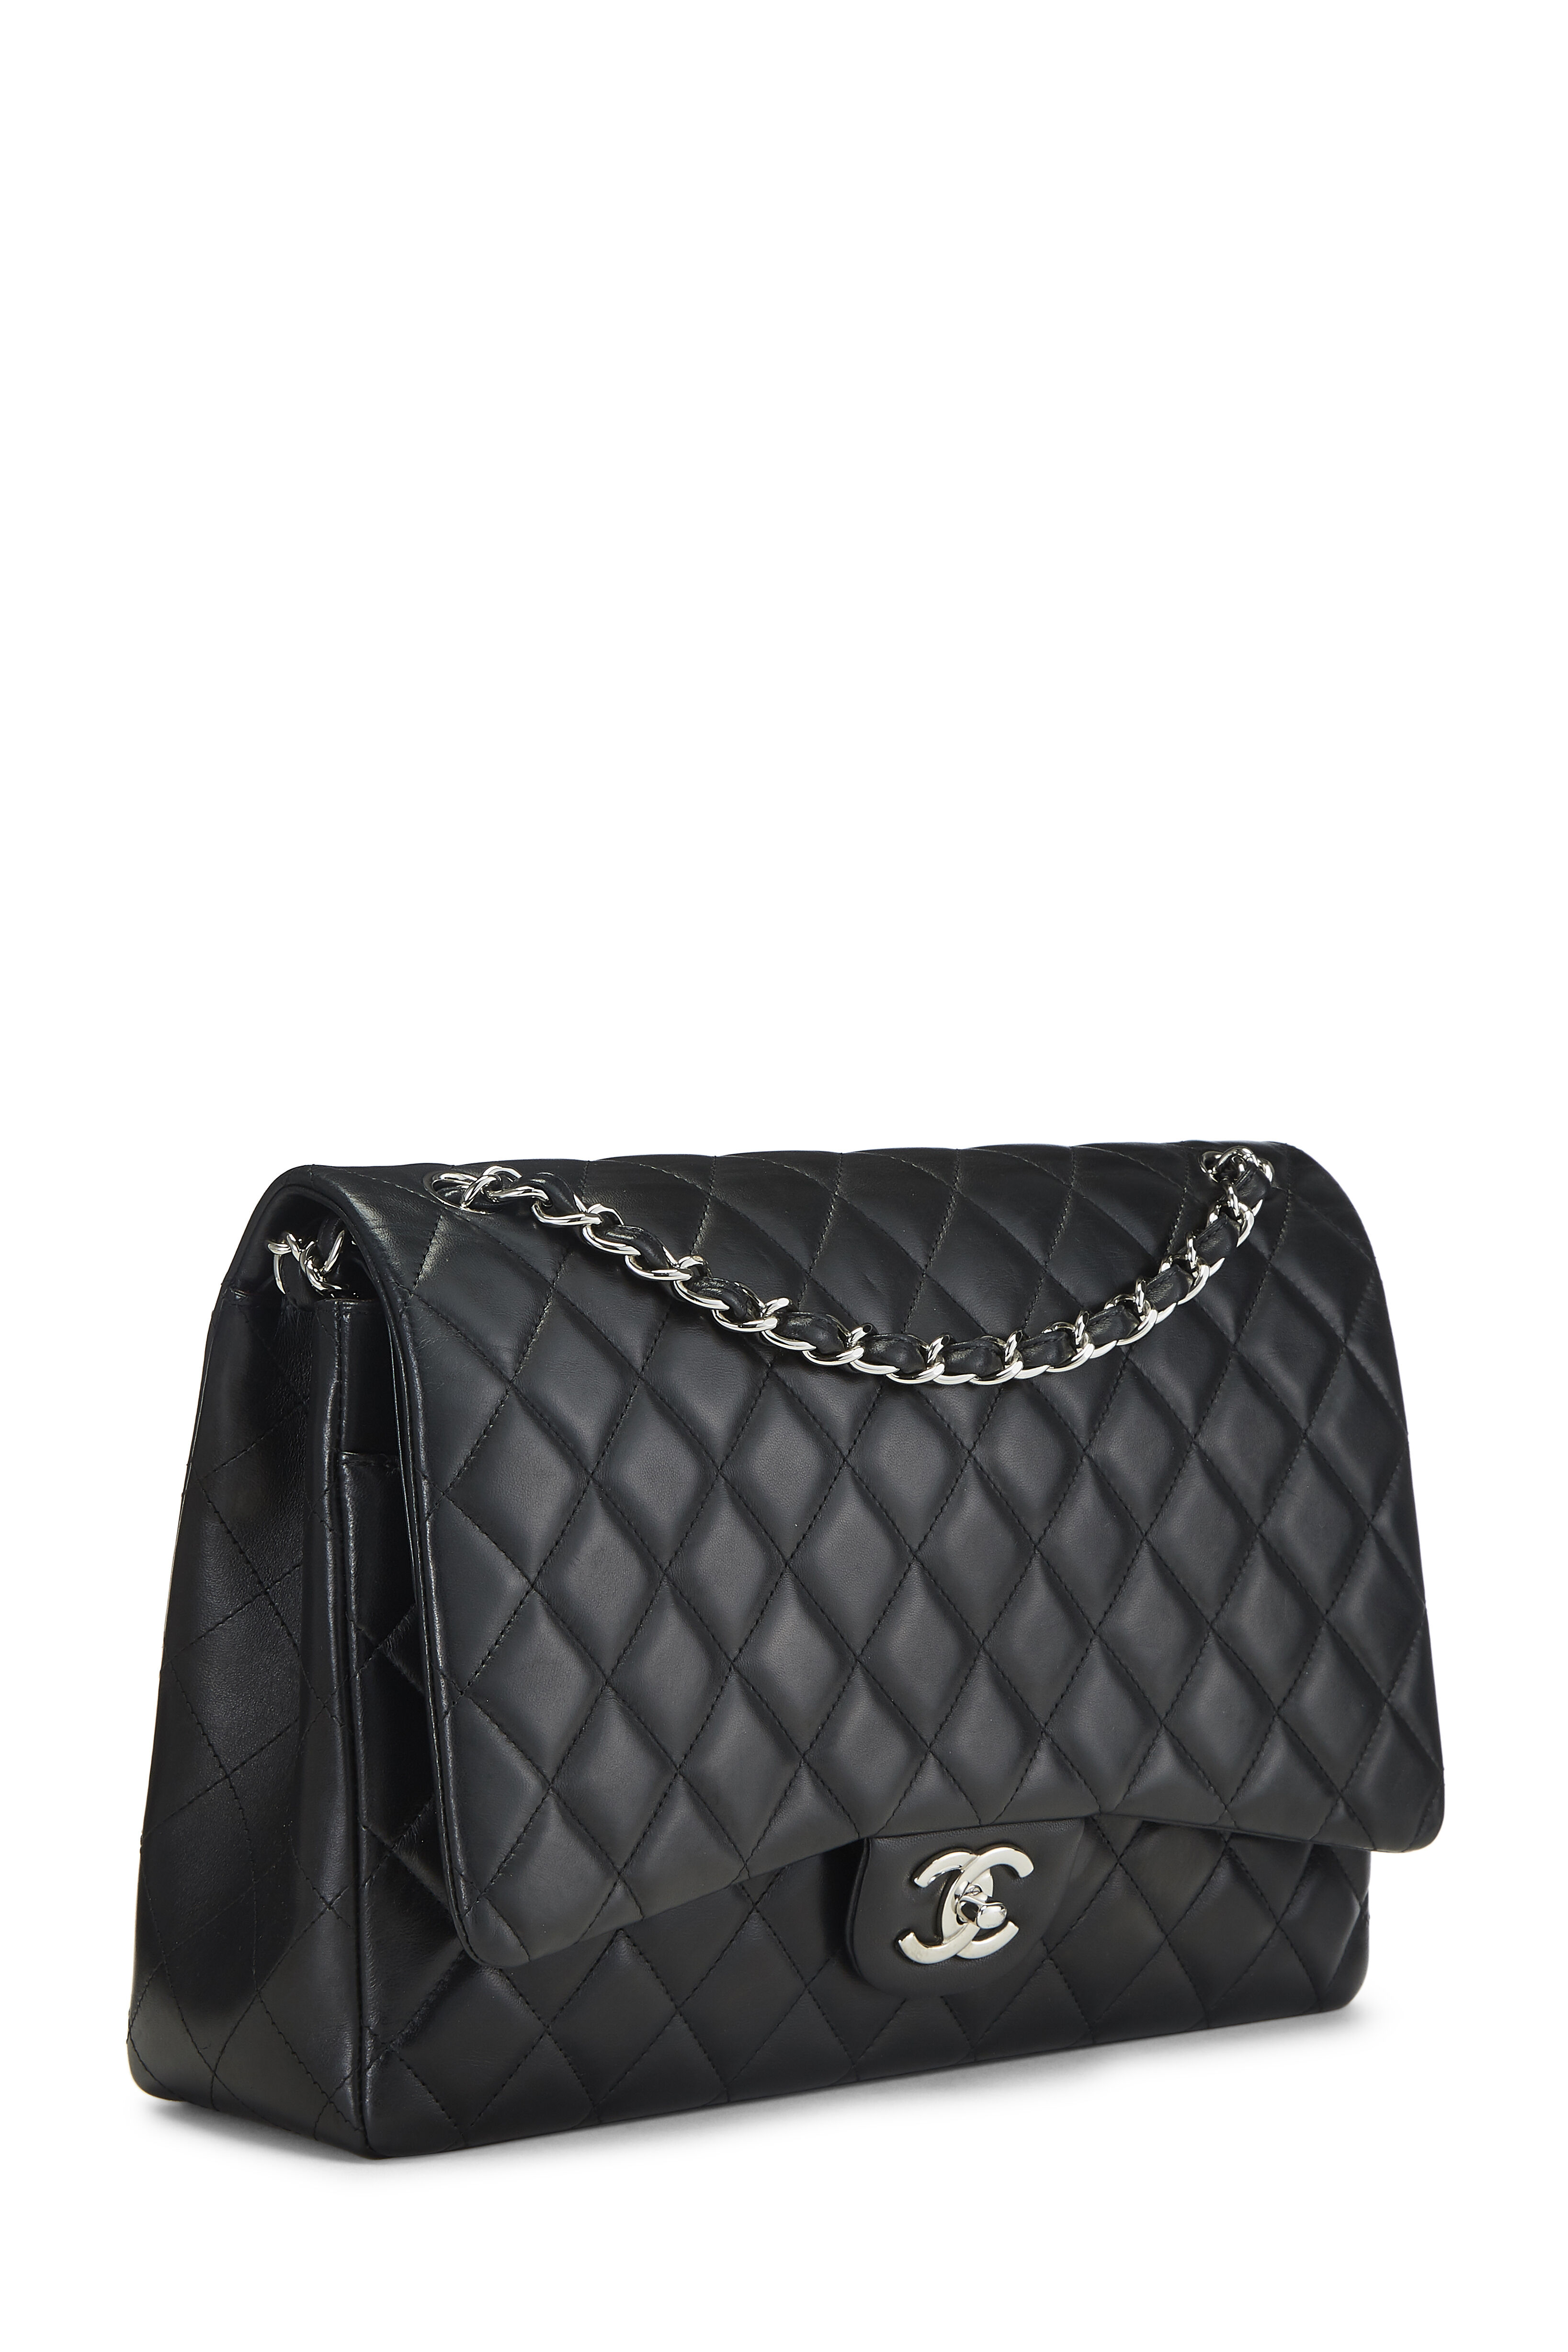 Chanel - Black Quilted Lambskin New Classic Double Flap Maxi